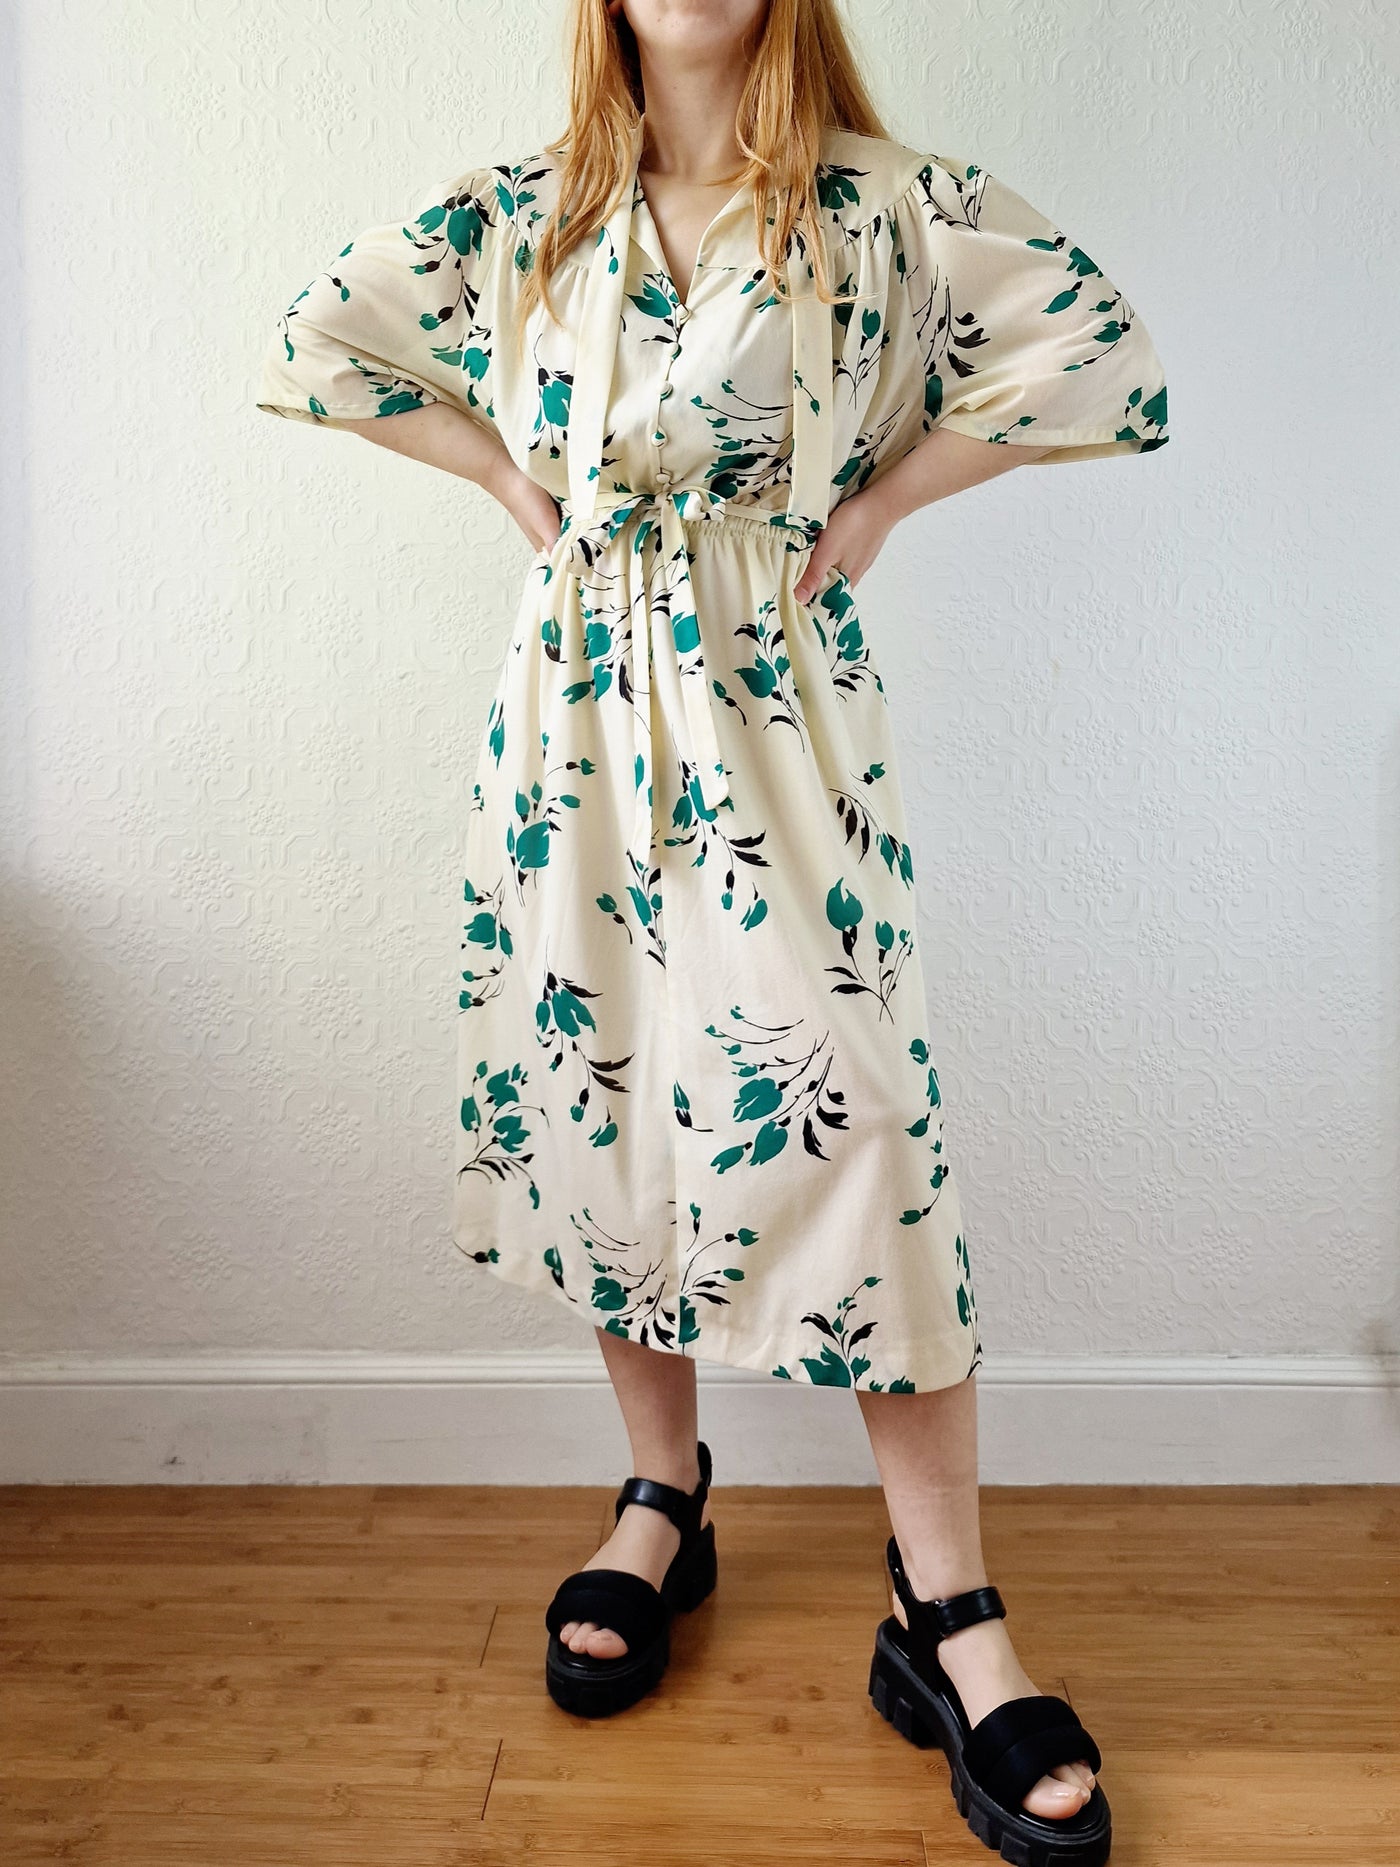 Vintage 70s Cream Floral Midi Dress with Short Sleeves - M/L